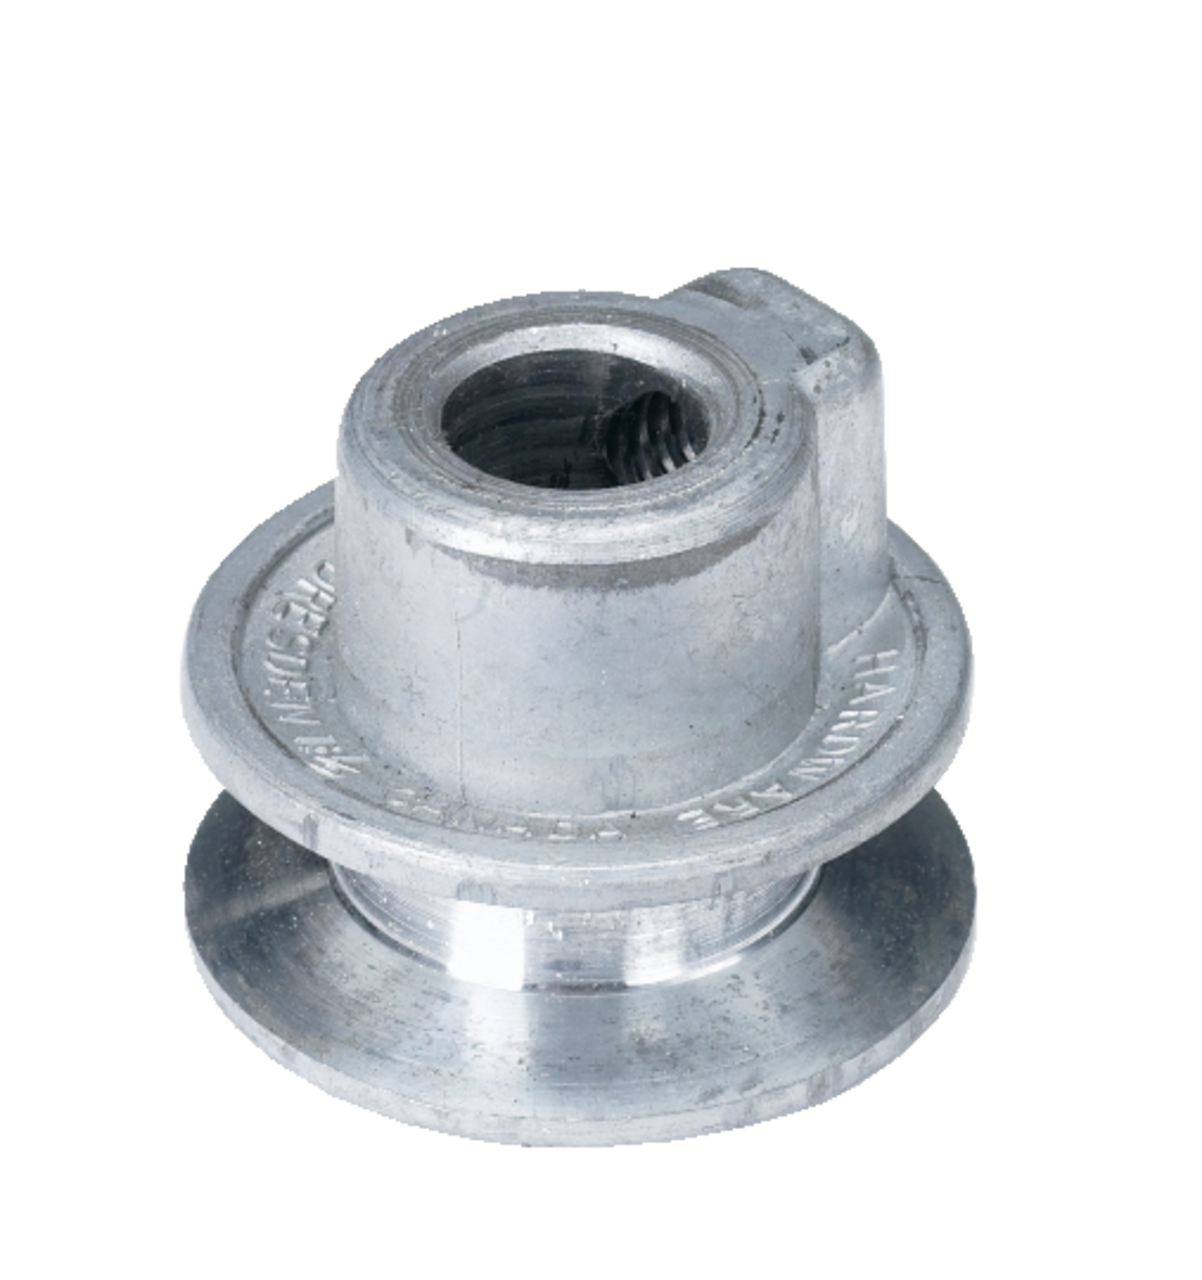 https://media-www.canadiantire.ca/product/fixing/electrical/rough-electrical/0565606/v-pulley-st-1-5x1-2-a758f639-b6a3-451d-b4a5-e94835d0bdcc.png?imdensity=1&imwidth=640&impolicy=mZoom